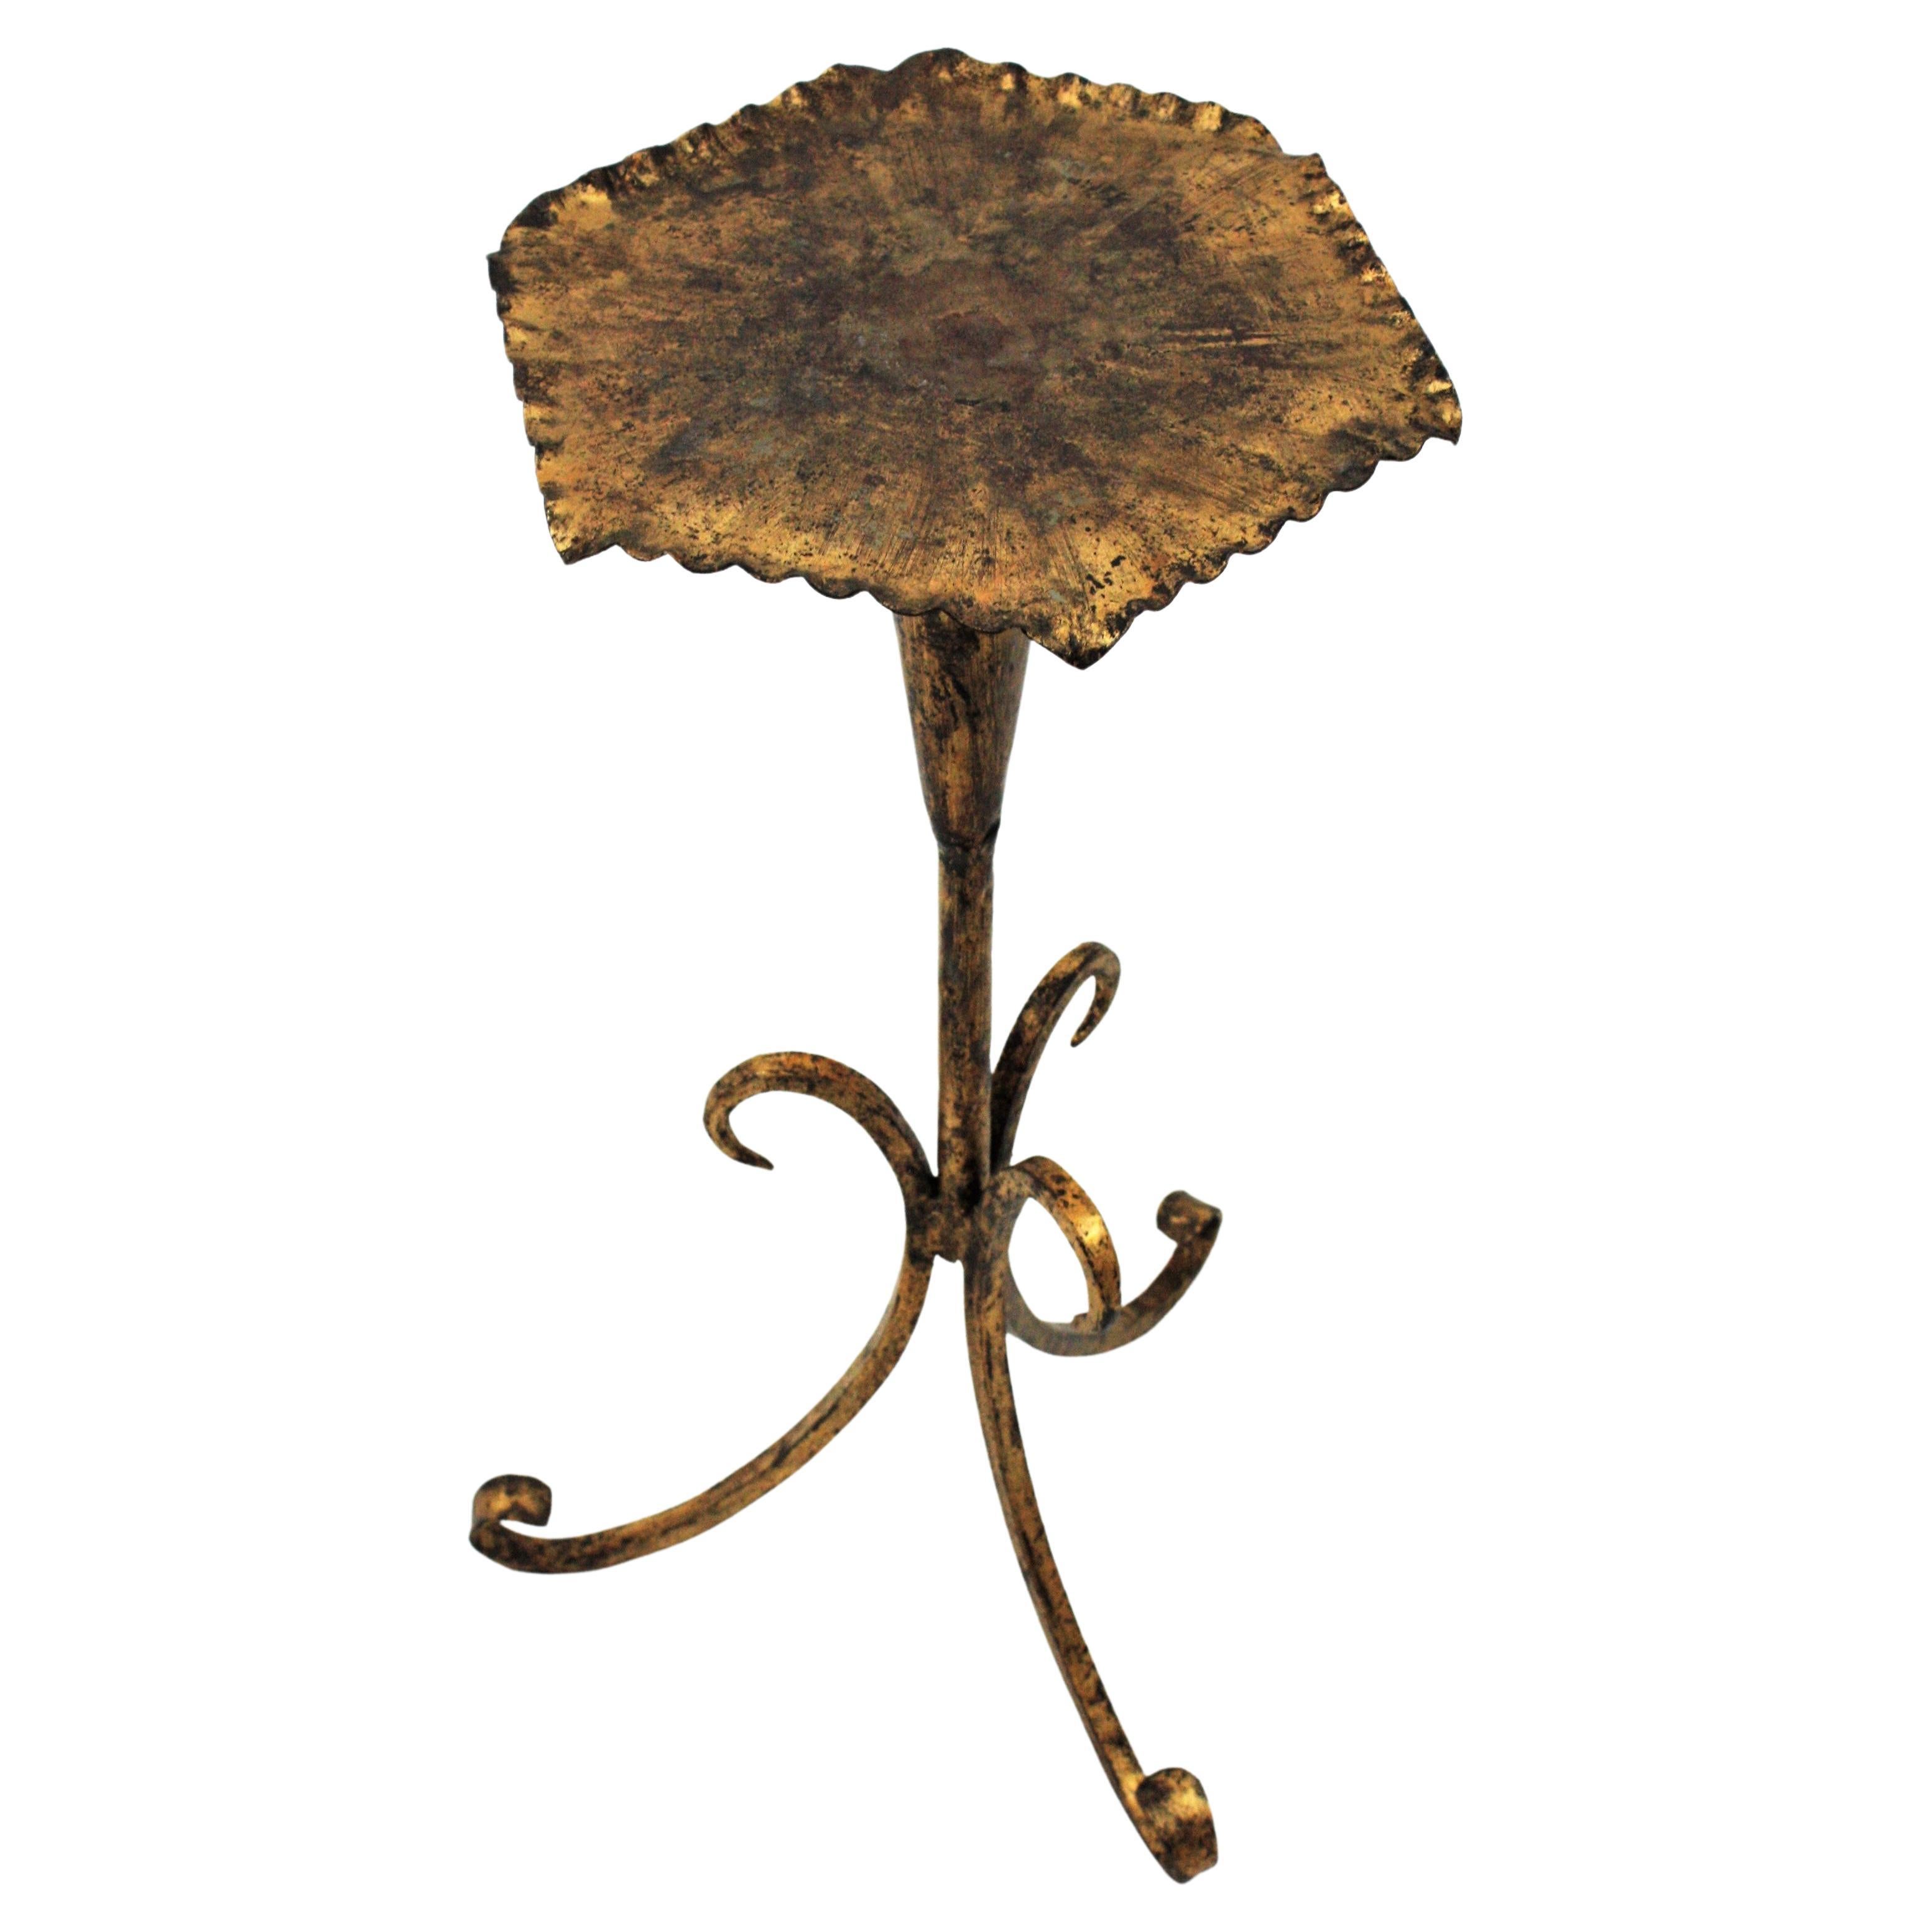 Eye-catching gilt hand forged iron hexagon side or end table. Spain, 1940s.
This beautiful Martini table features an hexagon top with twisted iron edge standing on a tripod base with scroll details. This table is entirely made by hand in wrought